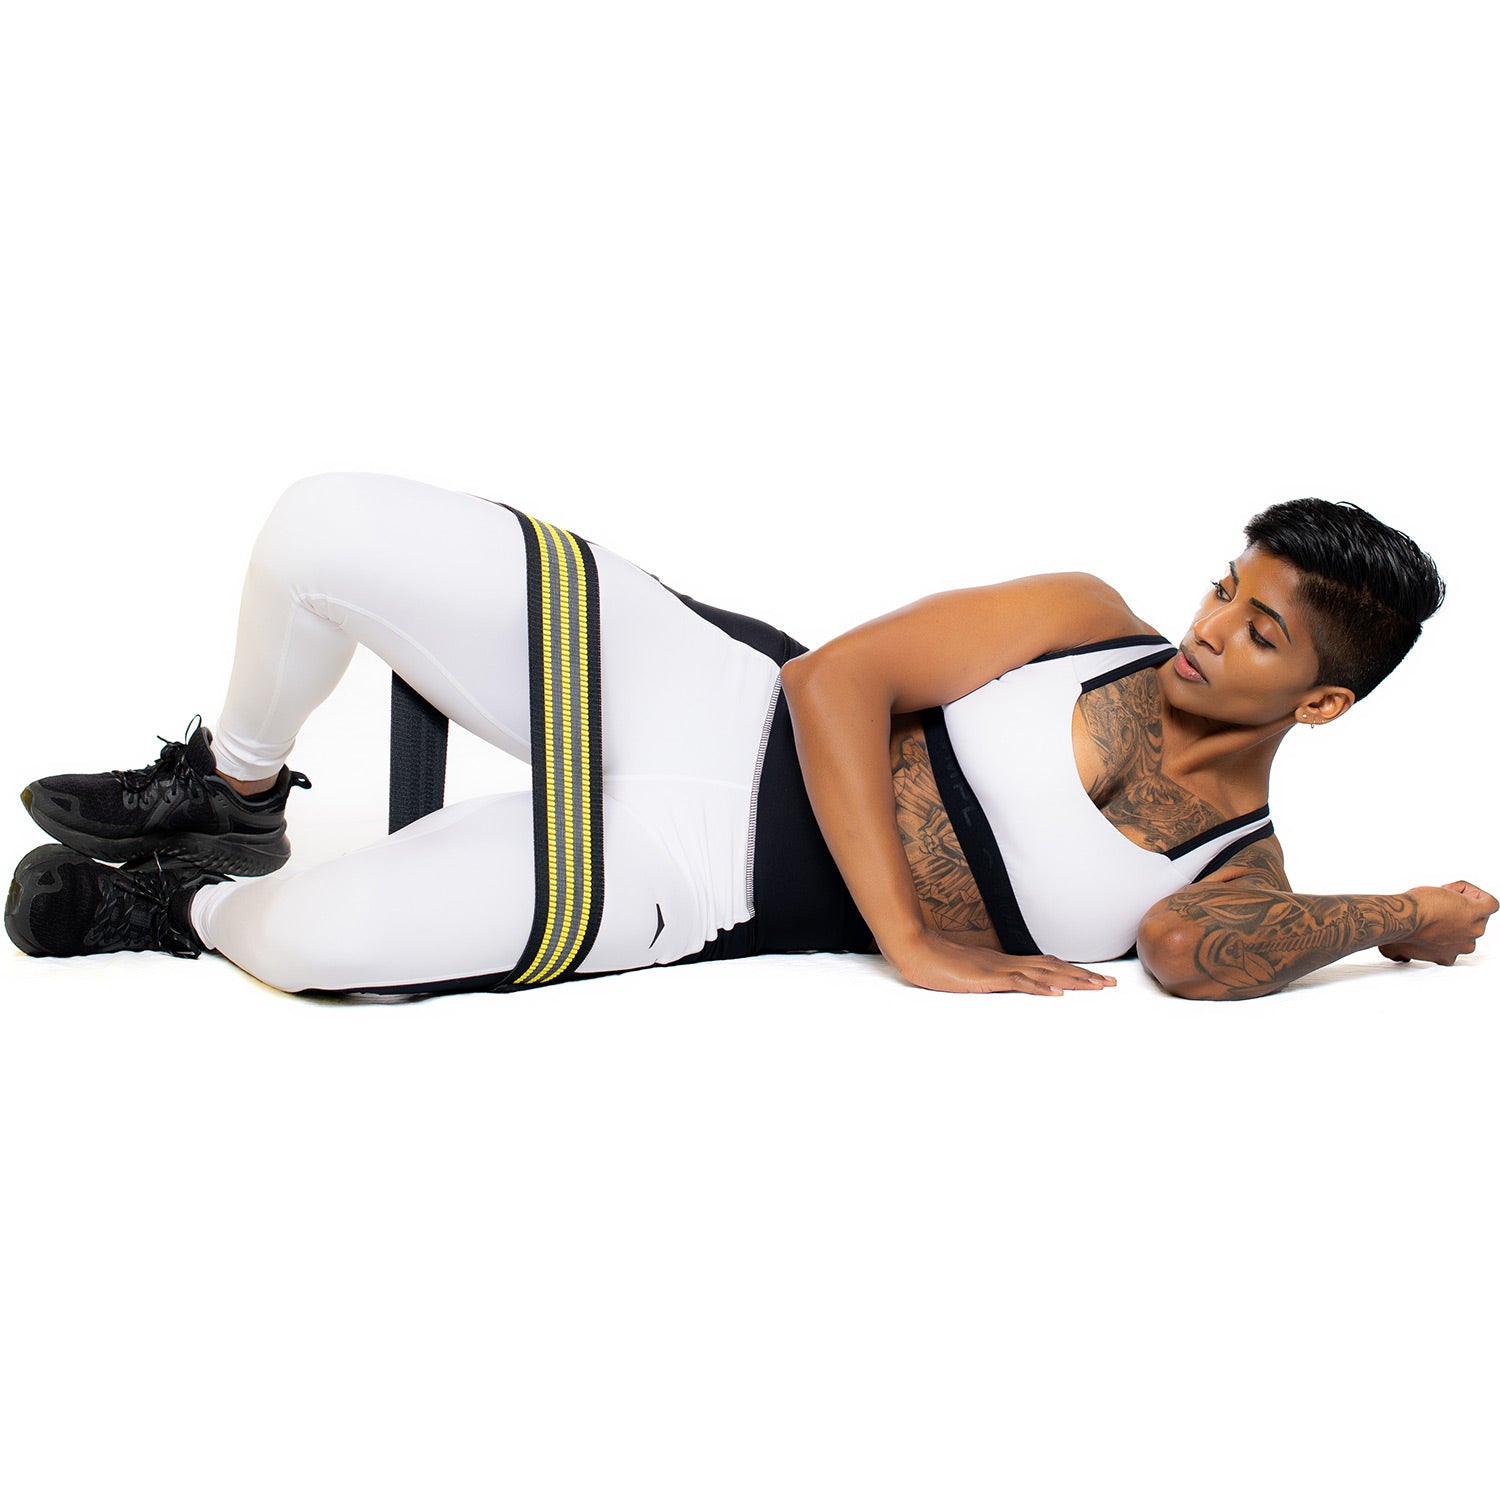 Hip Resistance Band - Outer thigh lift